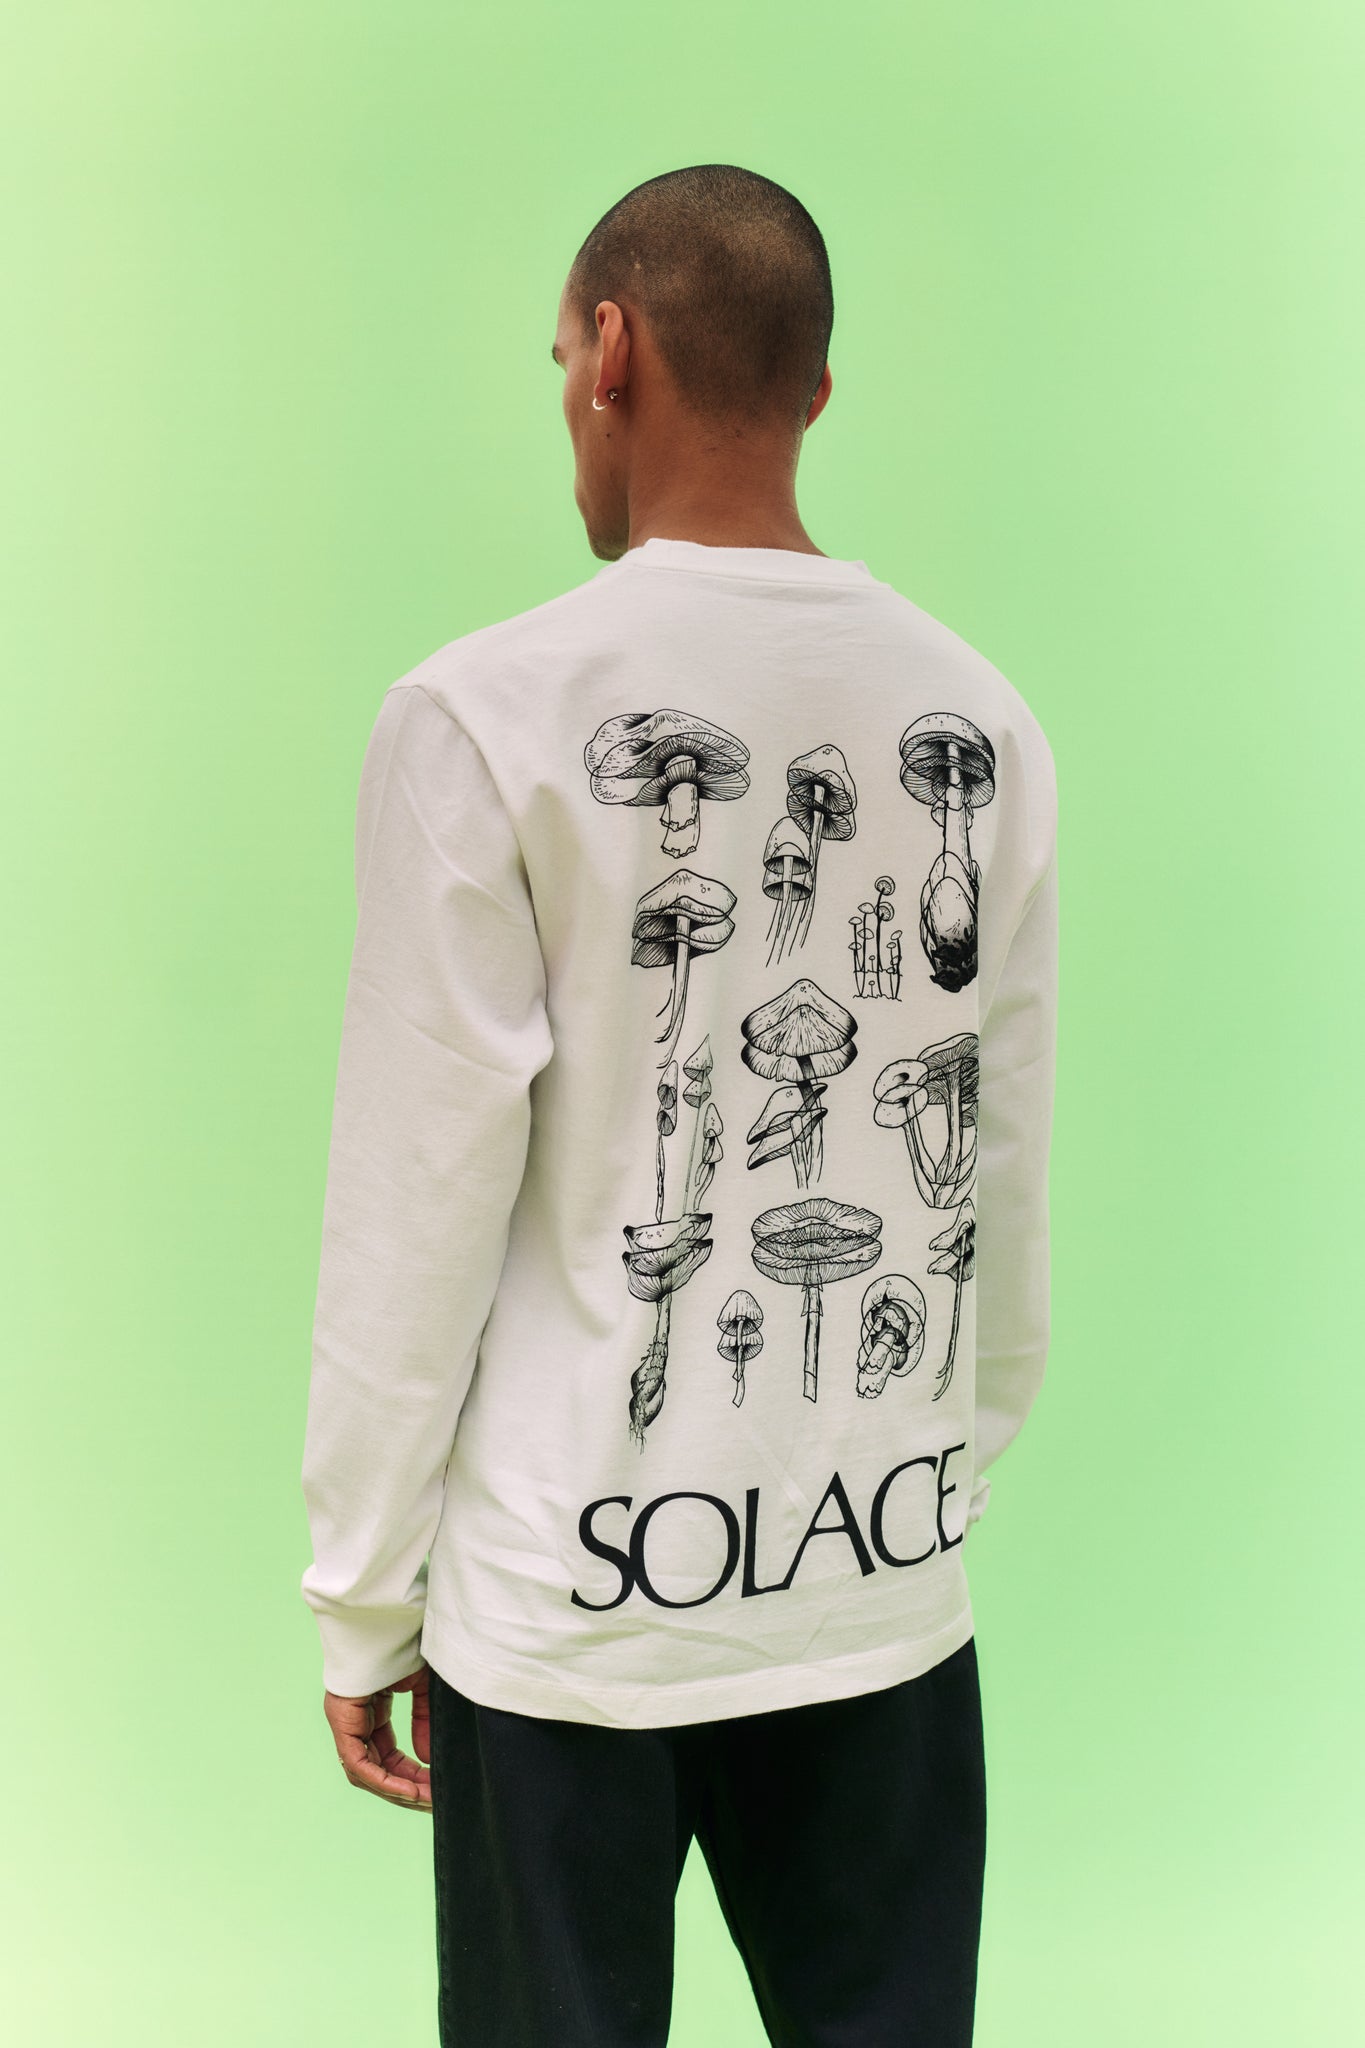 Solace London x James Carver White Tee